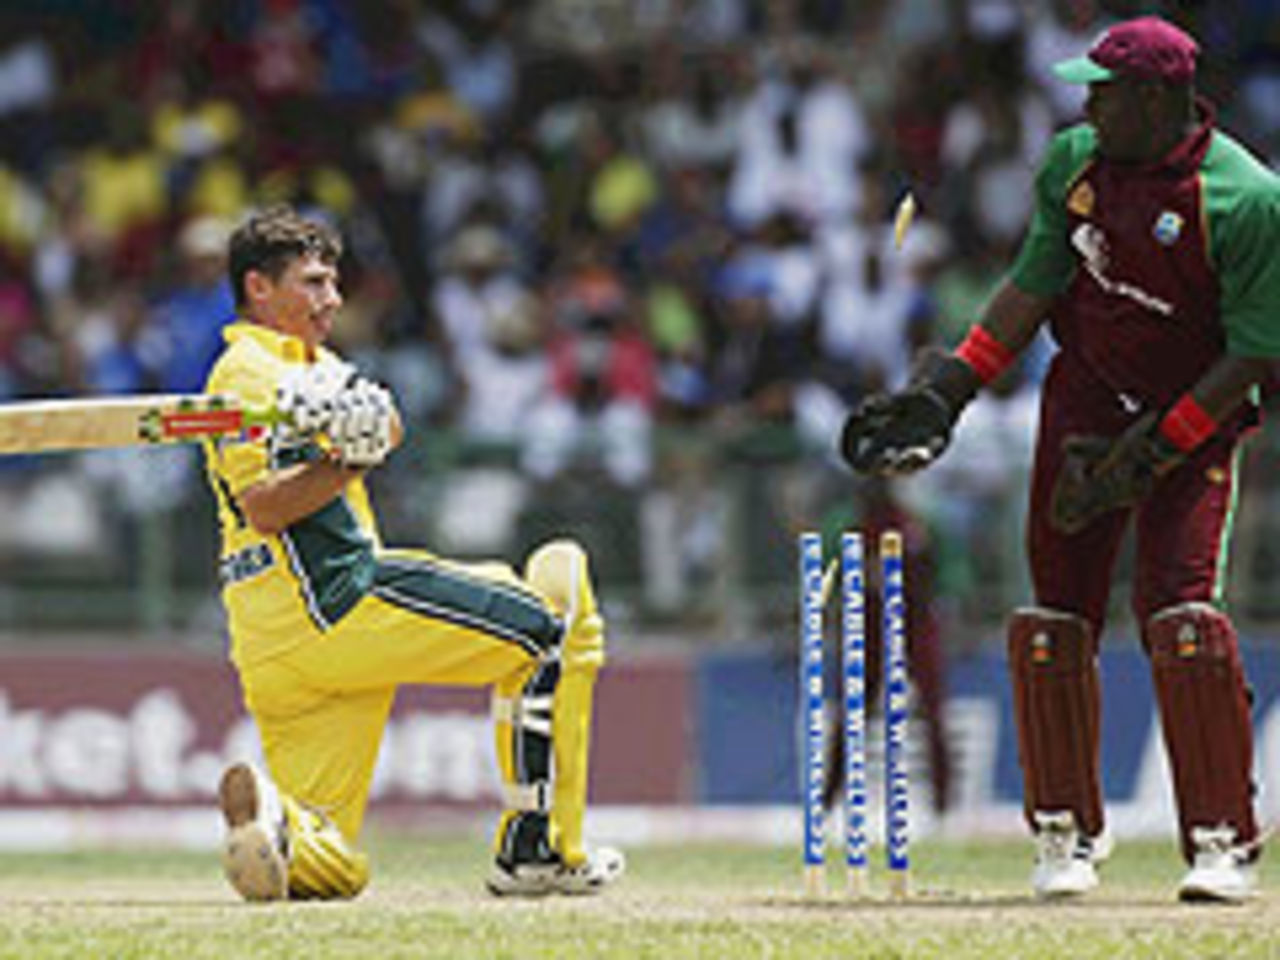 Going down: Brad Hogg is bowled as Australia slump to a third defeat against West Indies